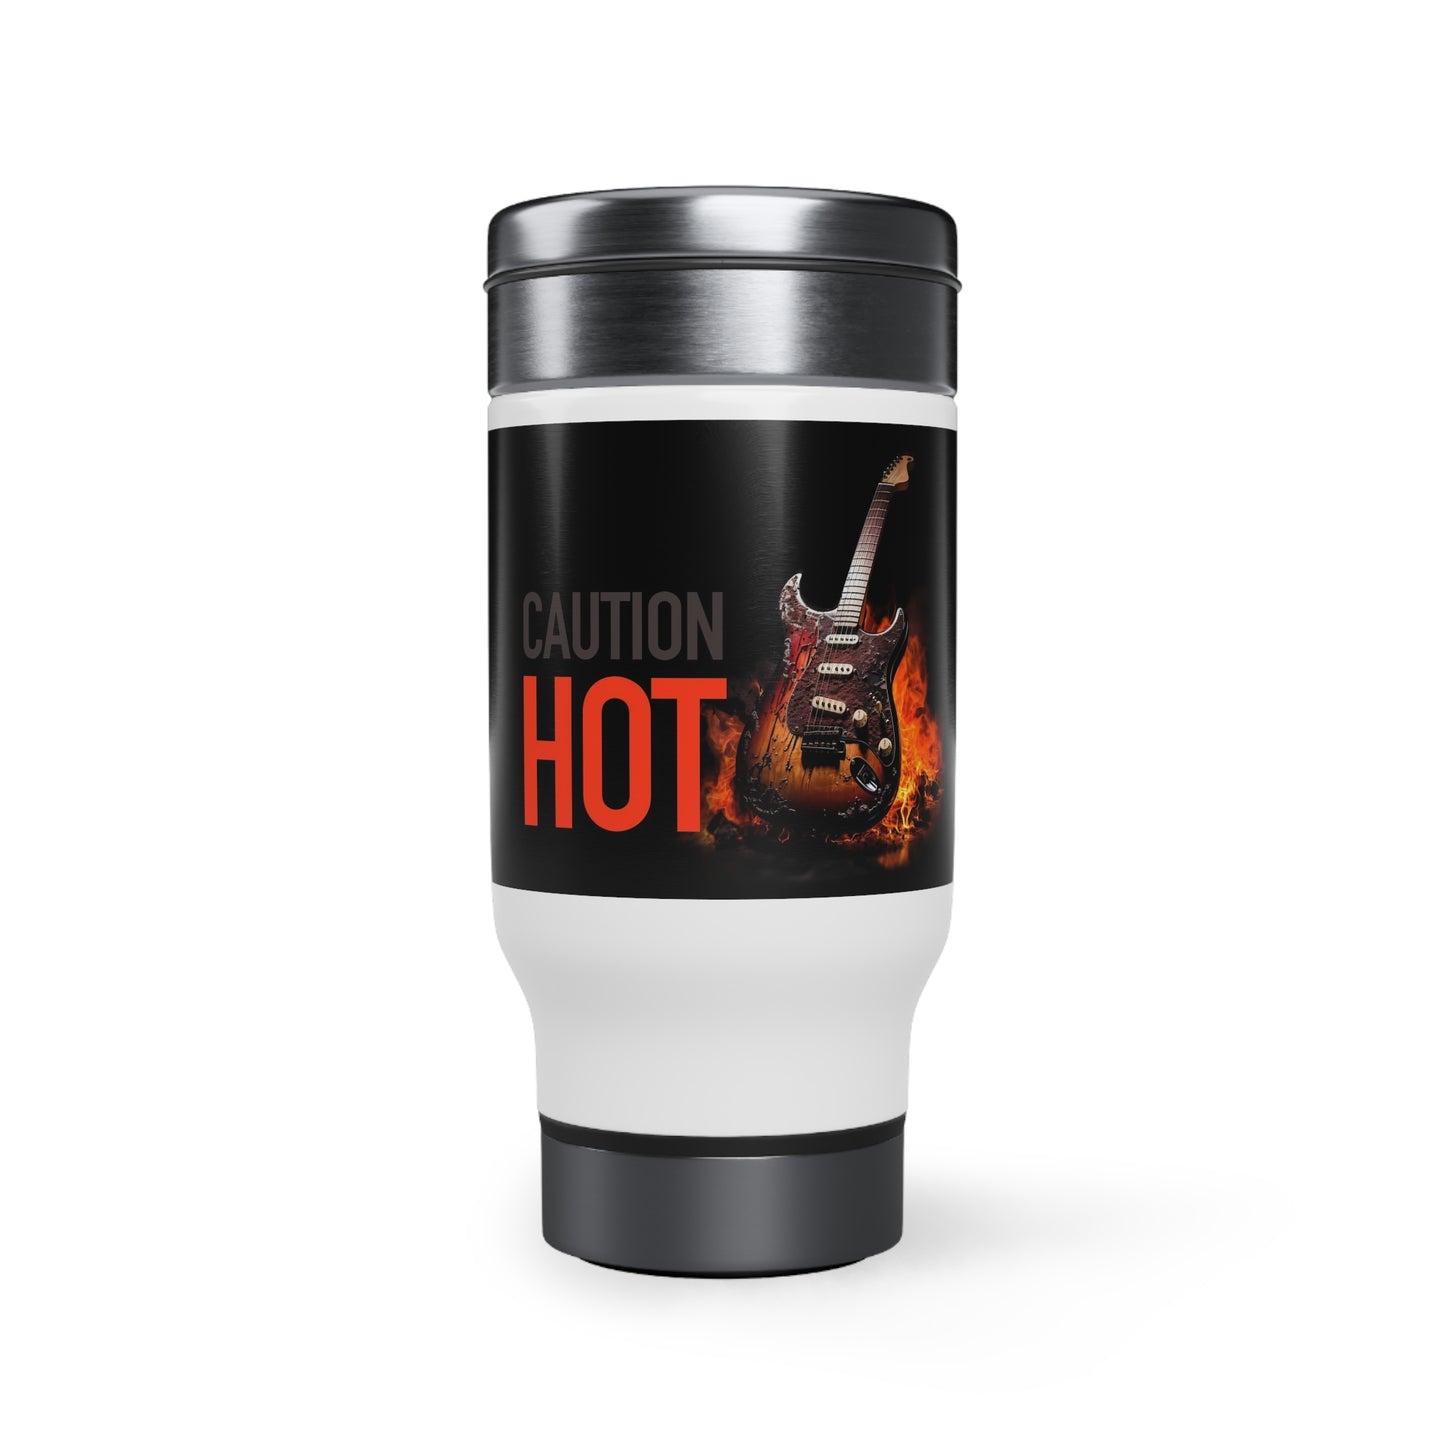 CAUTION HOT with Burning Stratocaster Guitar, Stainless Steel Travel Mug with Handle, 14oz, gift for Electric Guitar Players